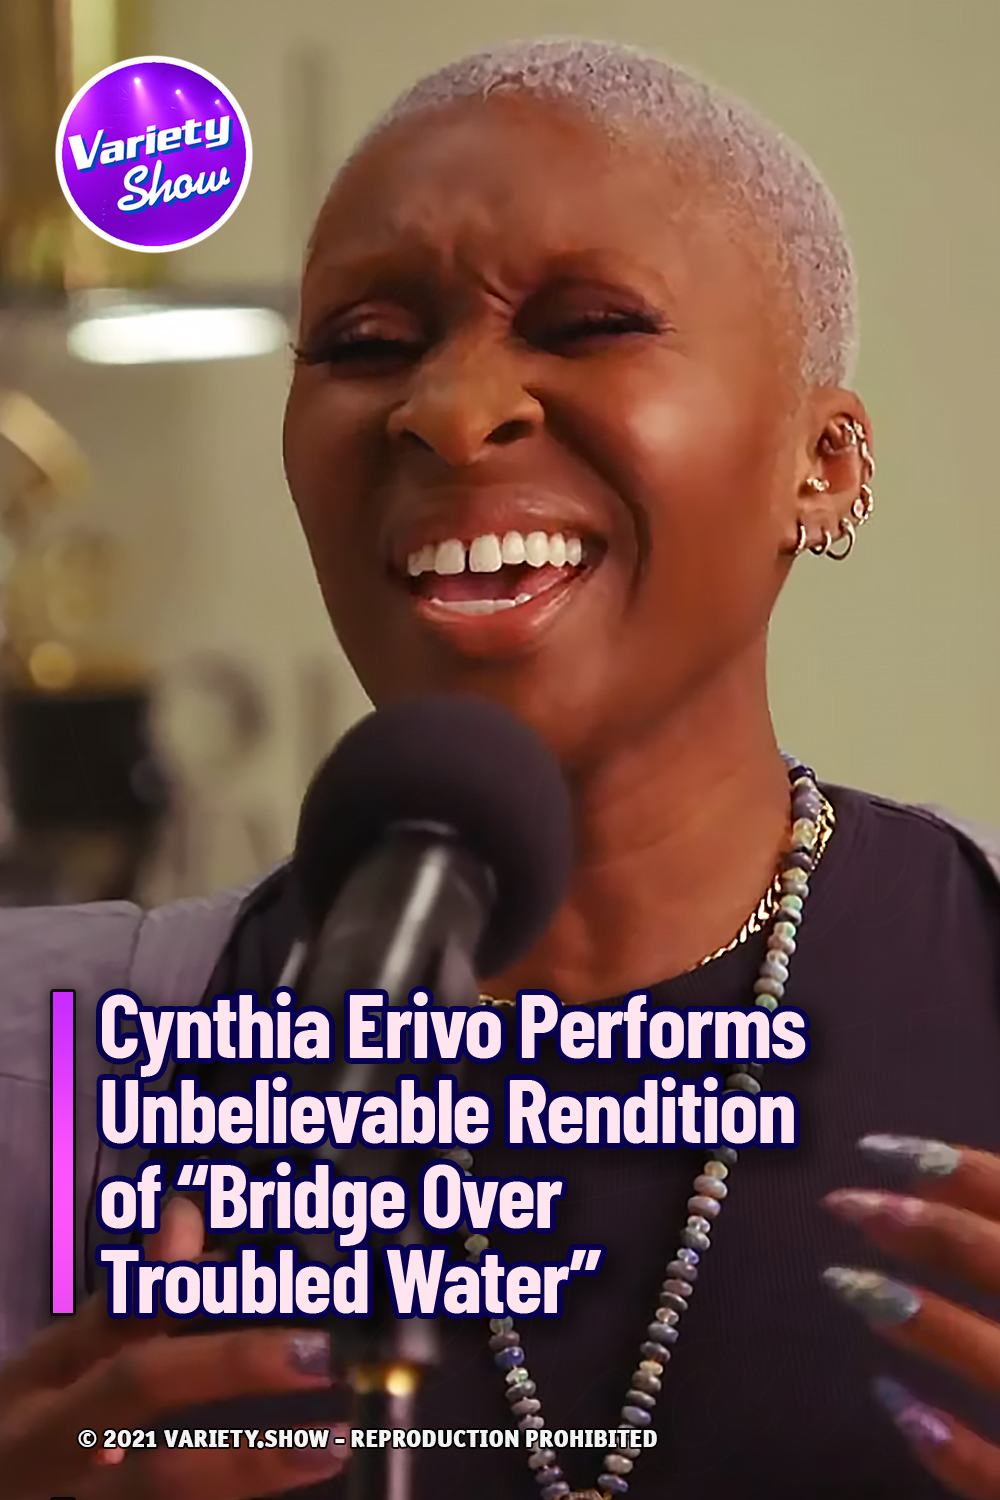 Cynthia Erivo Performs Unbelievable Rendition of “Bridge Over Troubled Water”